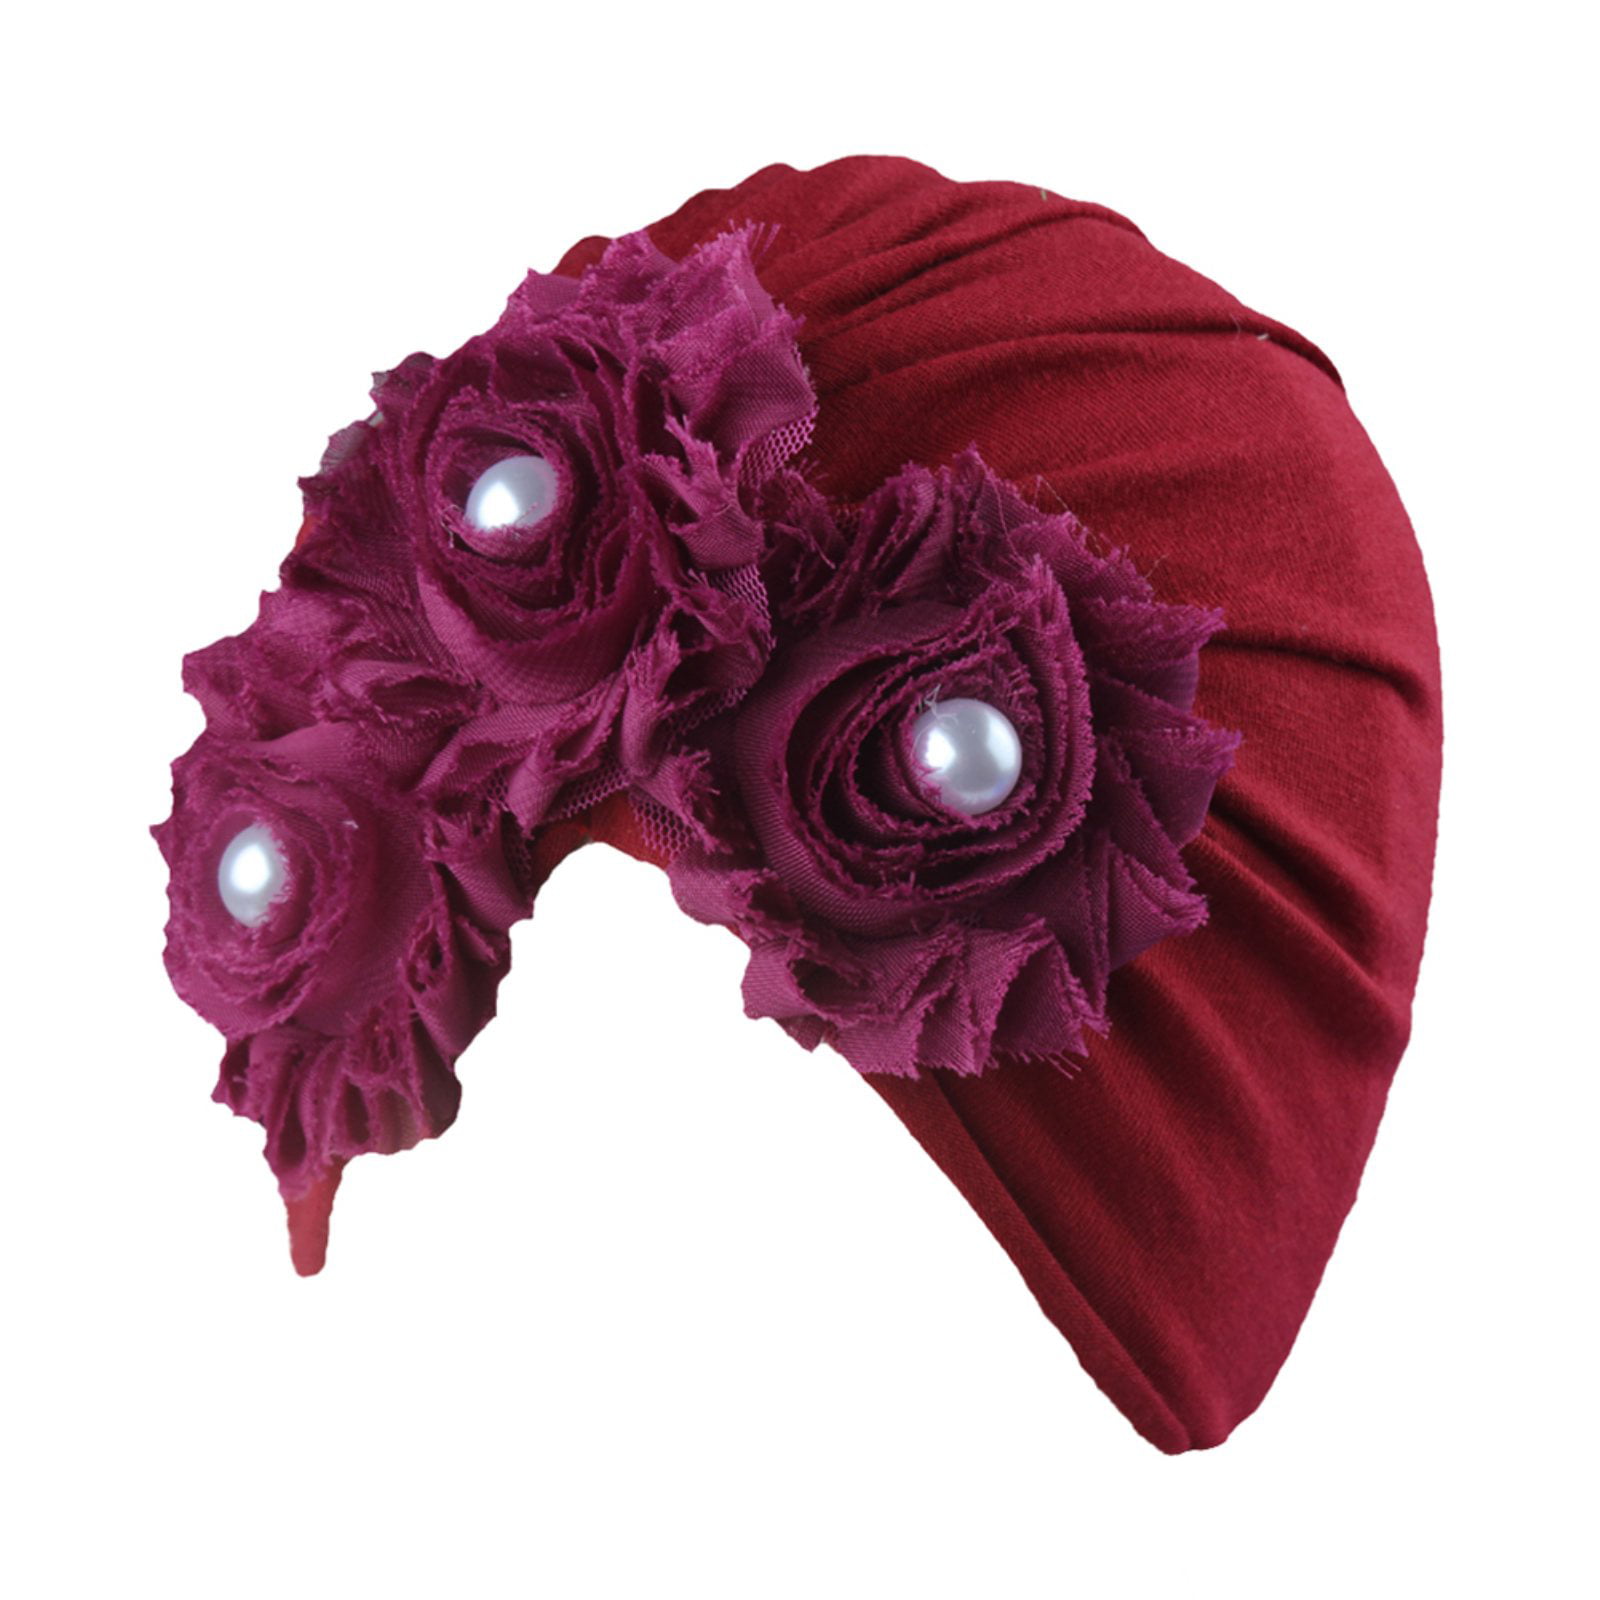 Details about   Cotton Hair Accessories Baby Girl Hat Infant Turban Headwraps Flower Knotted 